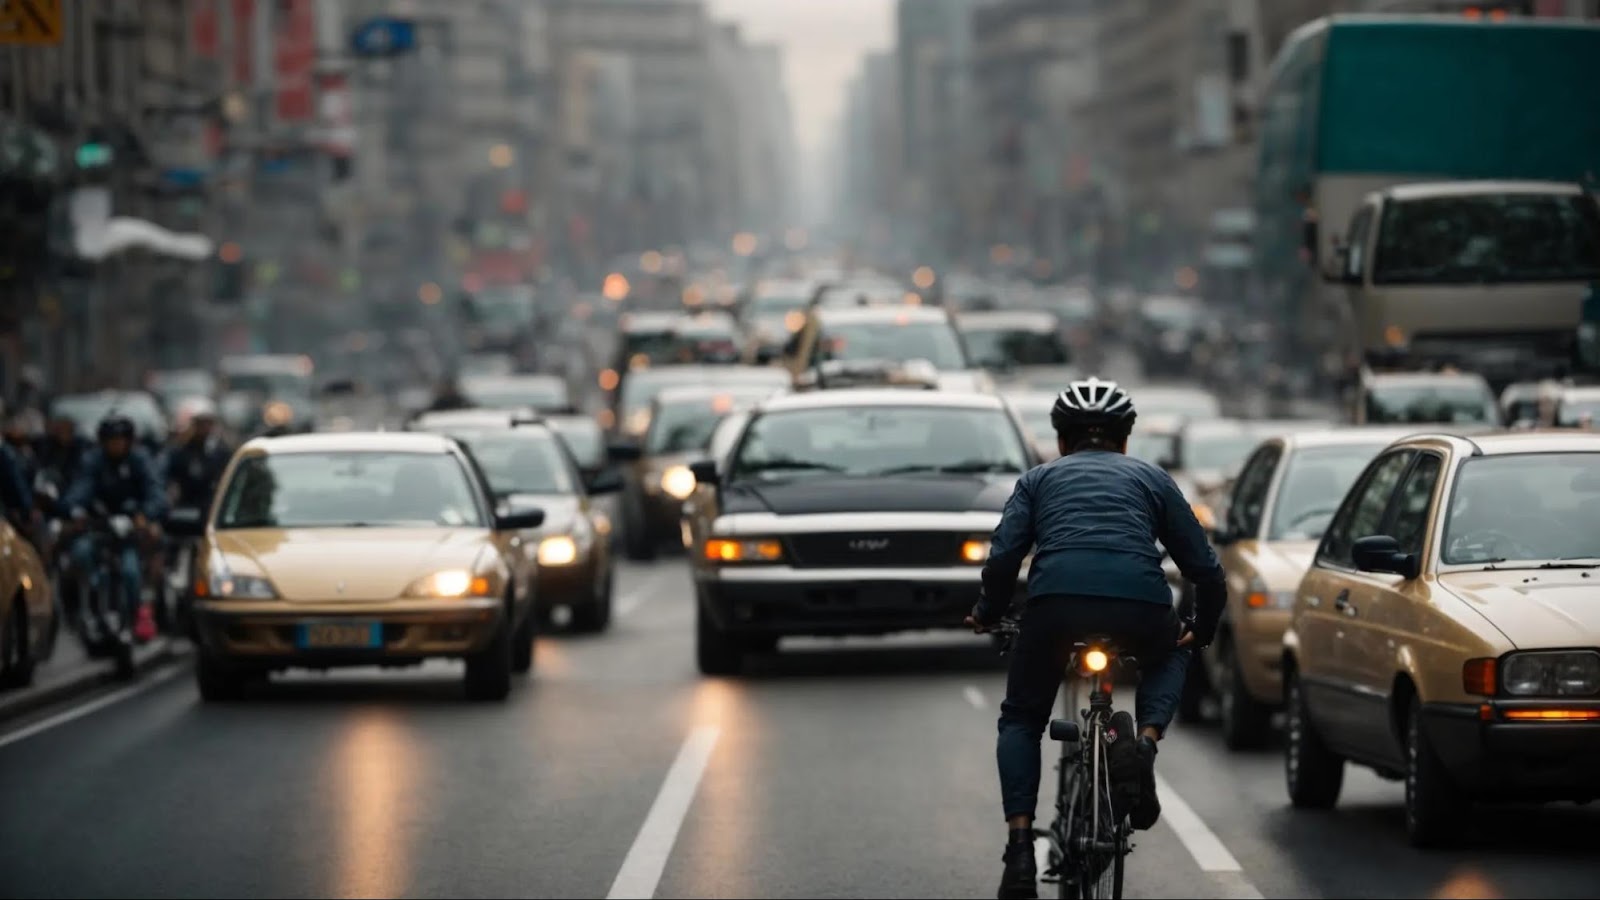 a cyclist carefully maneuvers through congested city traffic, with vehicles closely flanking either side.